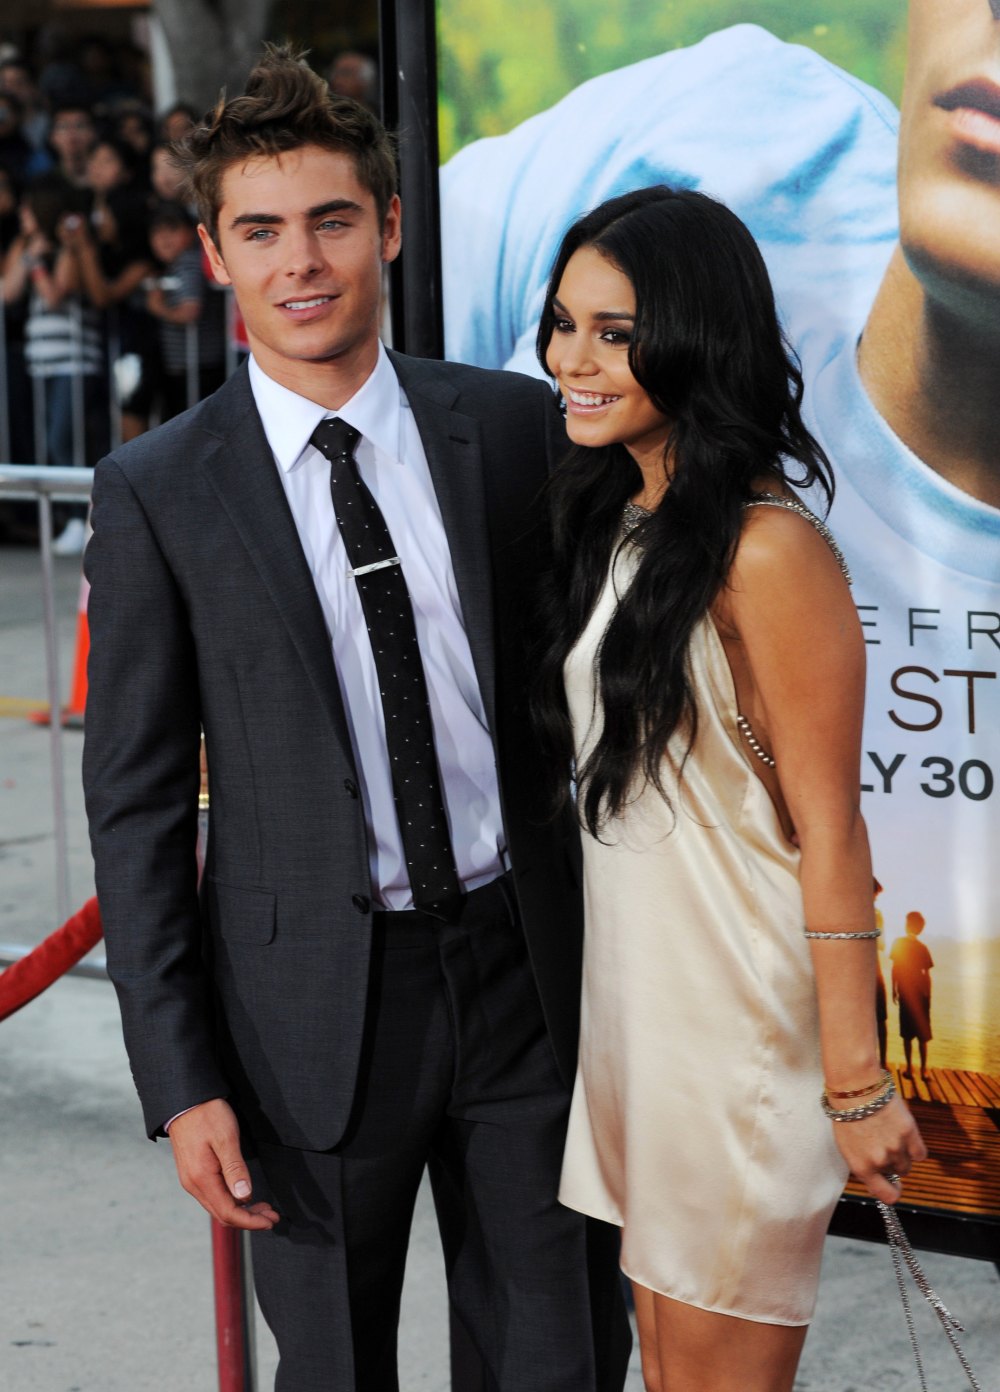 Fans Notice Zac Efron Is Following Vanessa Hudgens on Instagram More Than a Decade After Split- Details - 154